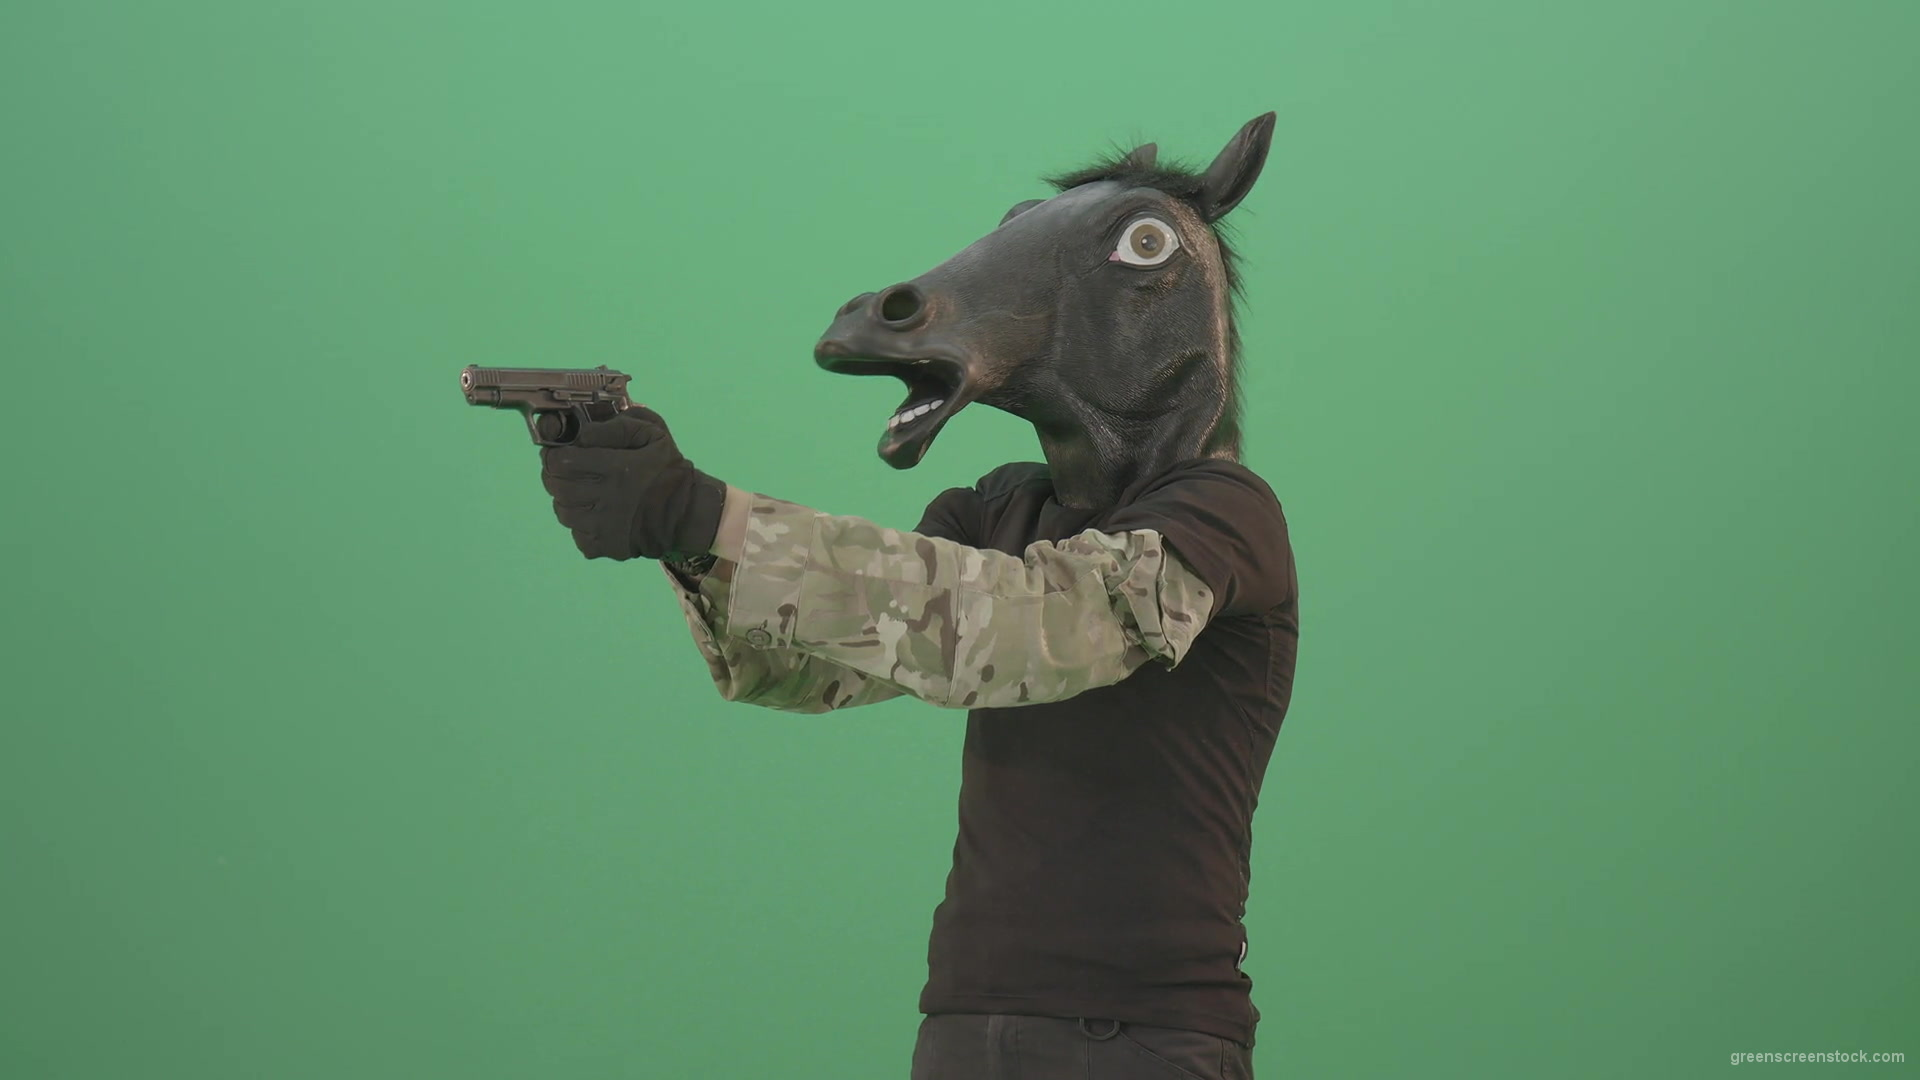 Funny-Horse-Man-in-Mask-shooting-enemies-isolated-on-green-screen-4K-Video-Footage-1920_006 Green Screen Stock